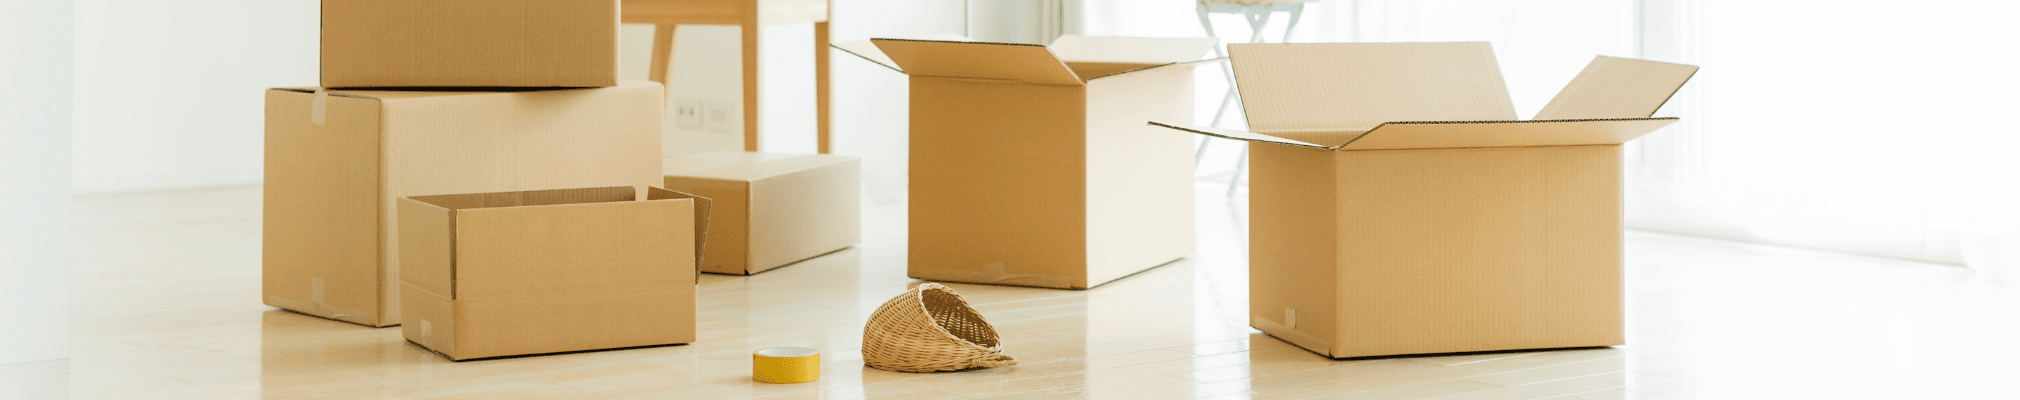 Moving boxes. Start your property search on Share to Buy!